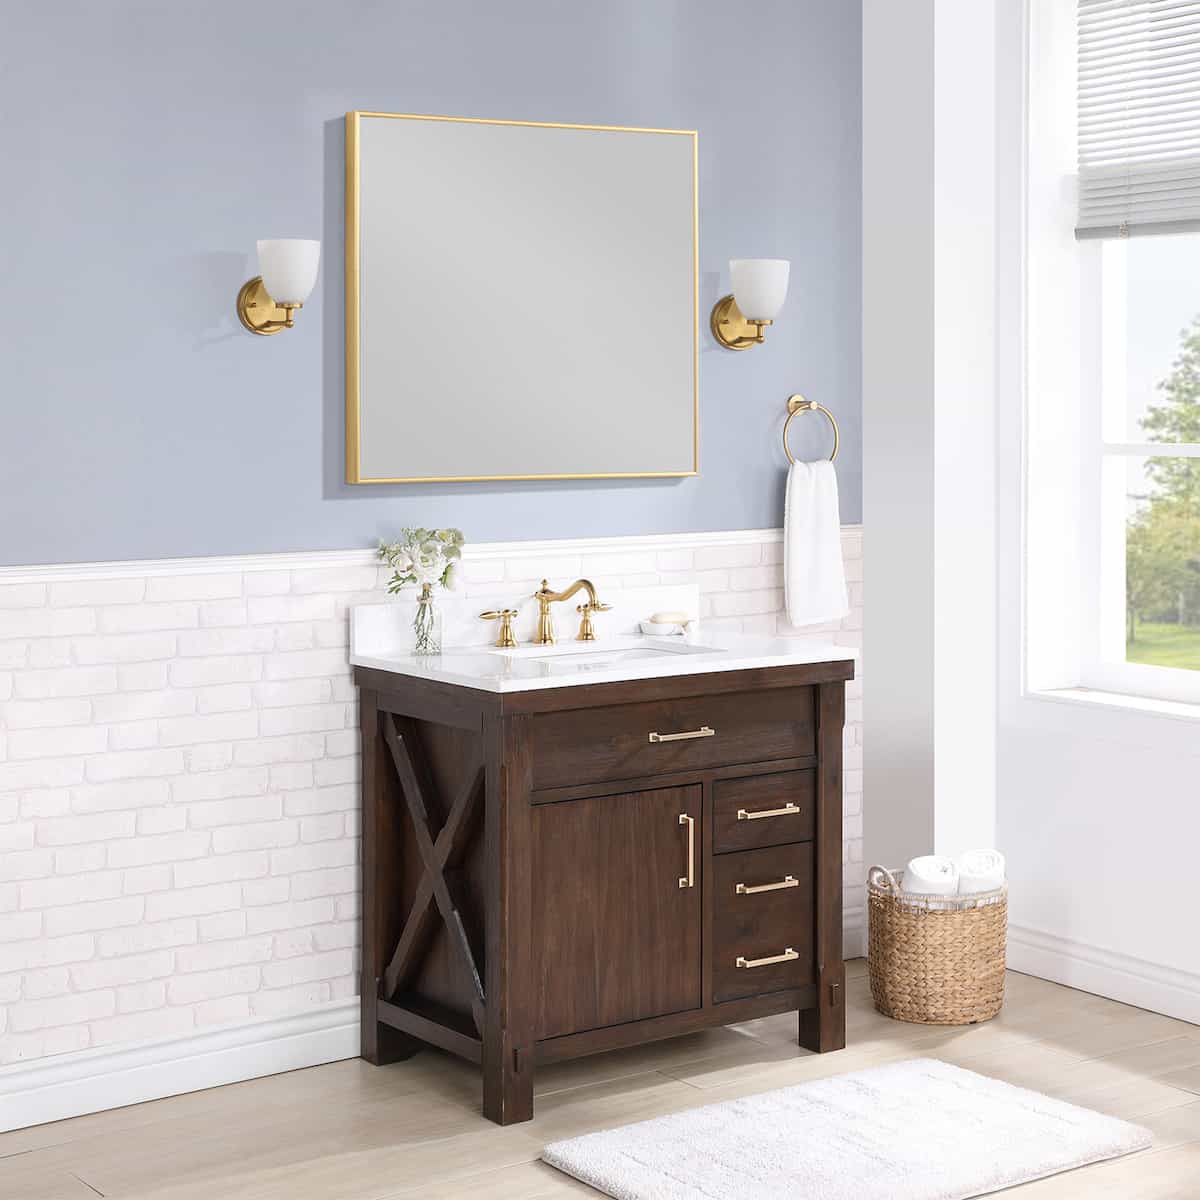 Vinnova Viella 36 Inch Freestanding Single Sink Bath Vanity in Deep Walnut Finish with White Composite Countertop With Mirror Side 701836-DW-WS